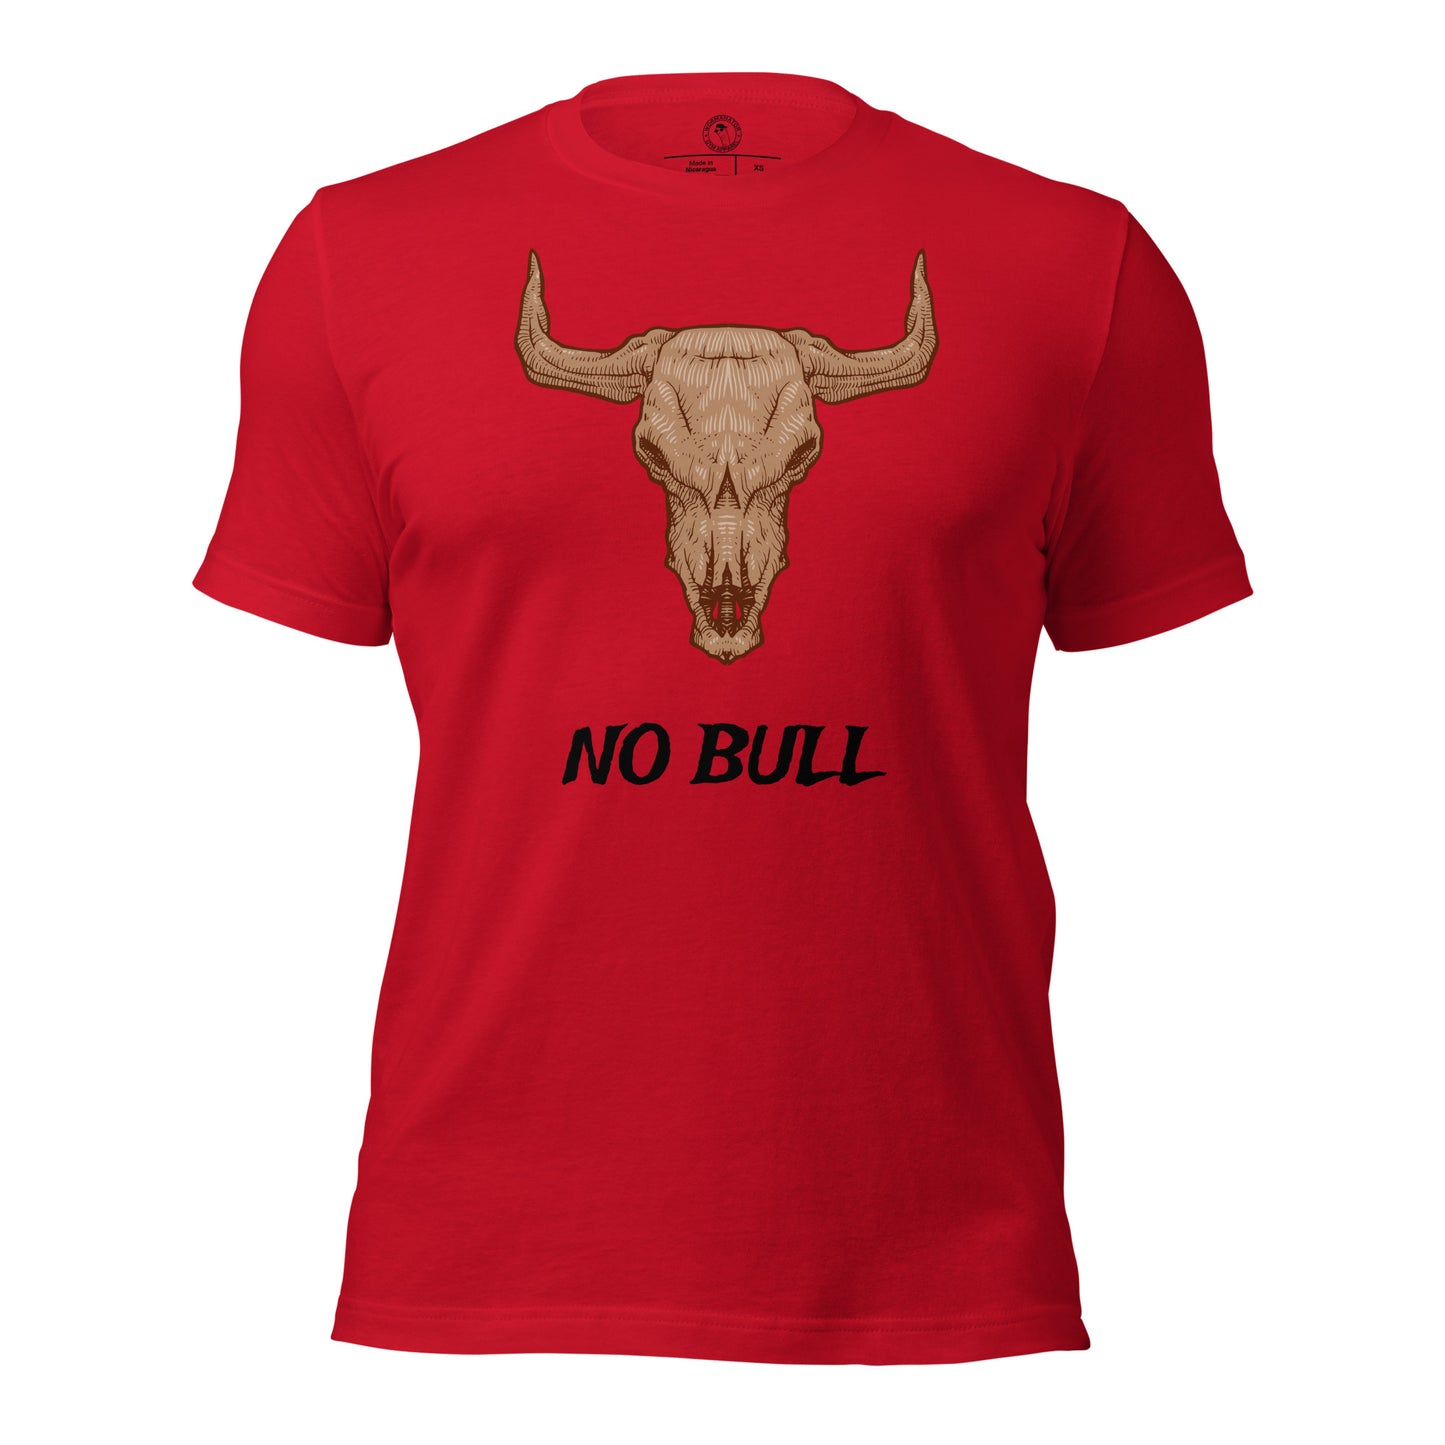 No Bull Shirt in Red